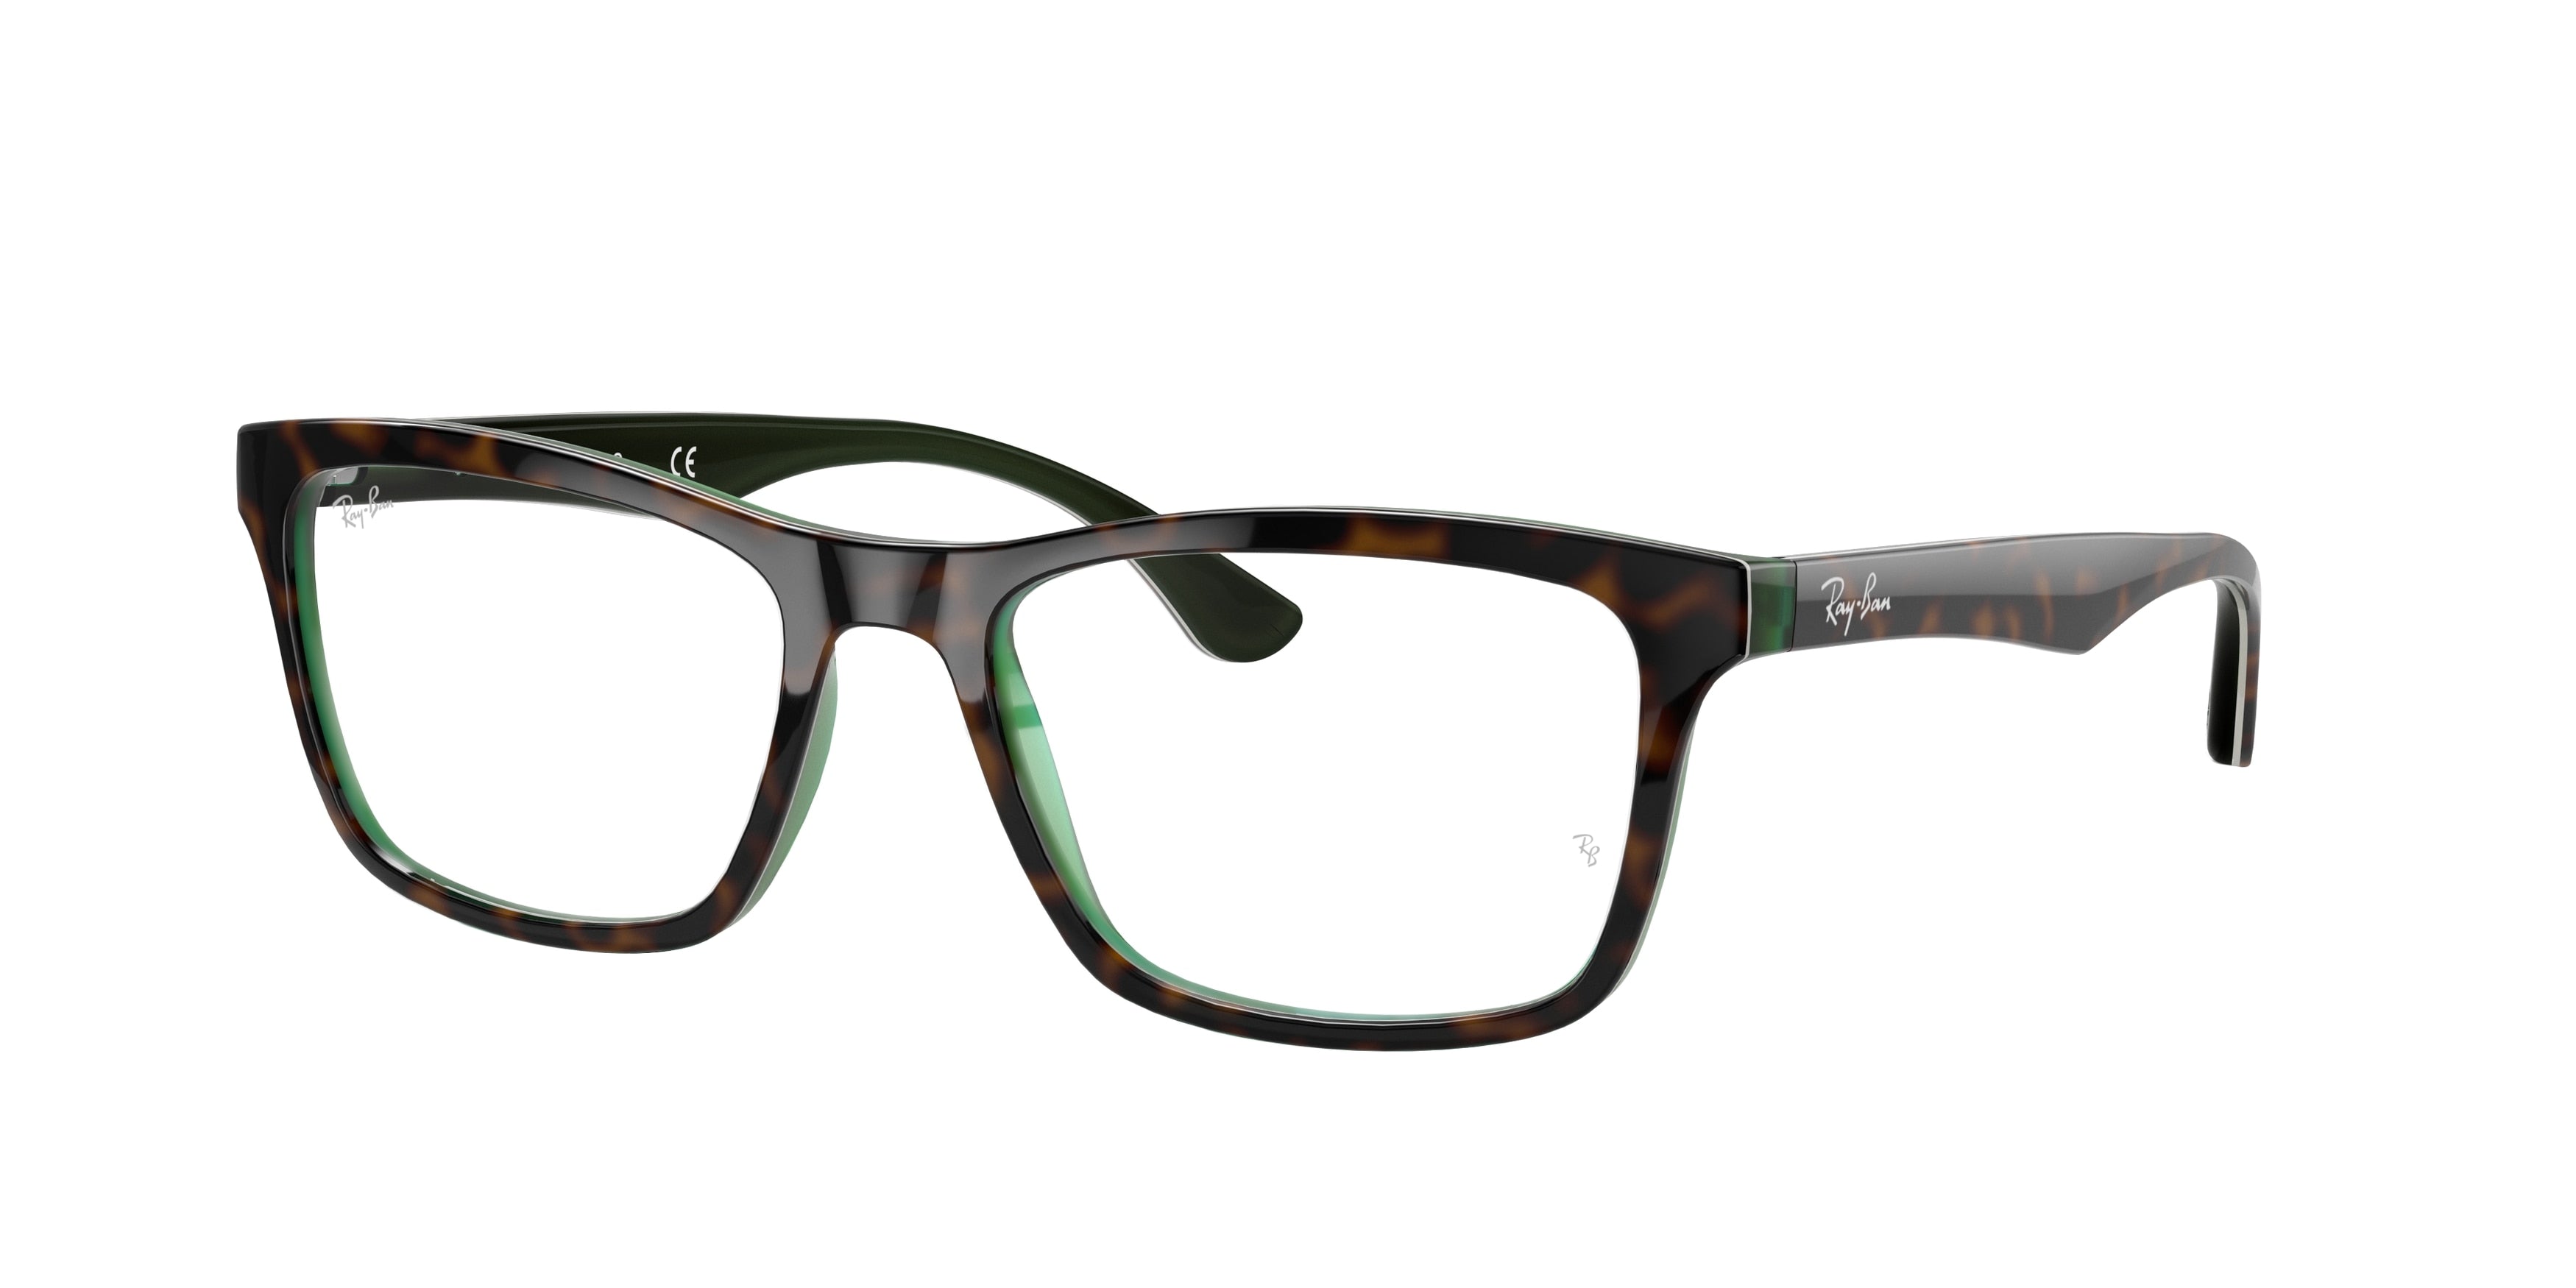 Ray-Ban Optical RX5279 Square Eyeglasses  5974-Havana On Transparent Green 57-150-18 - Color Map Brown